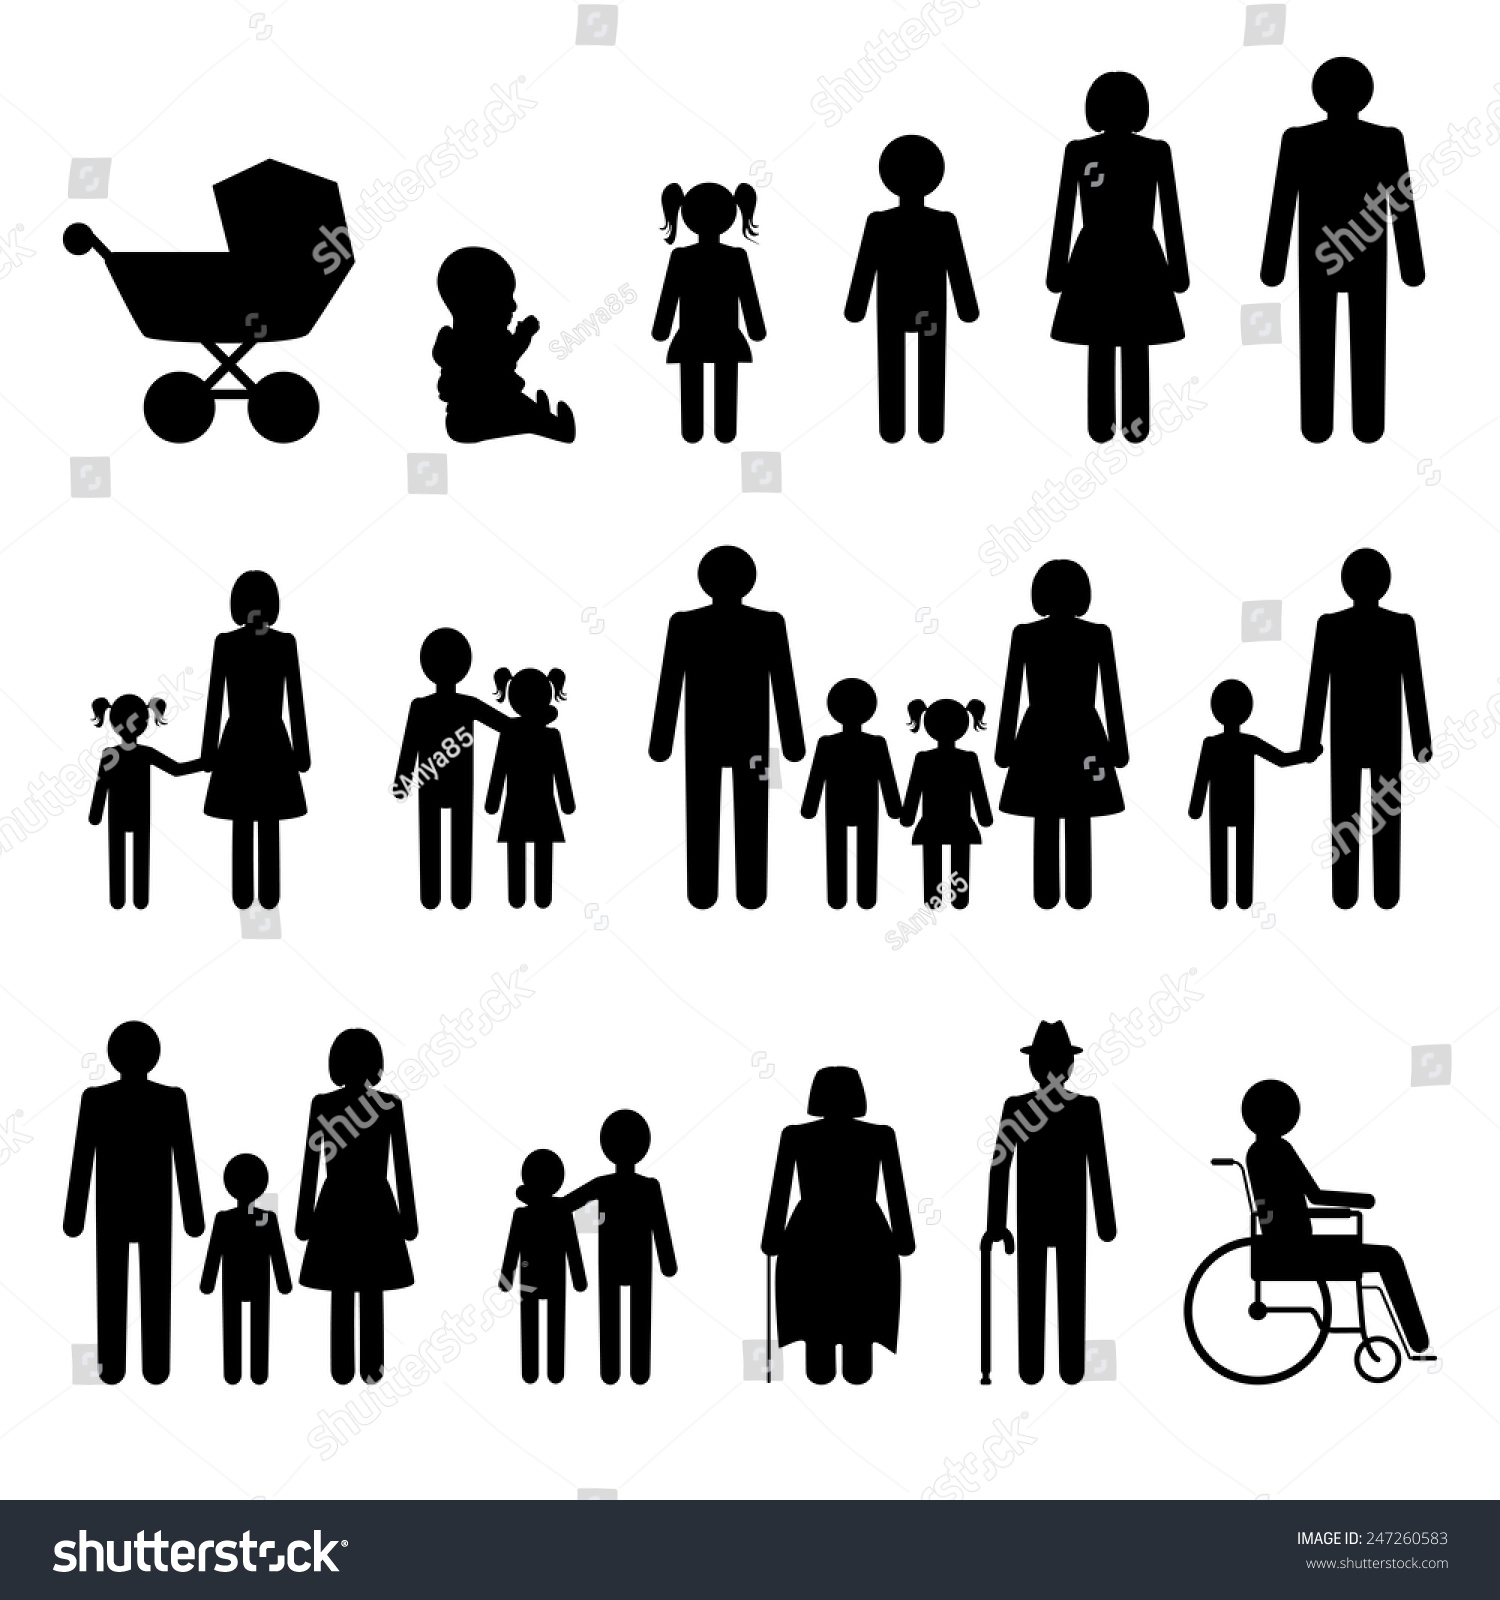 Family Icons Set In Black And White Stock Vector Illustration 247260583 ...